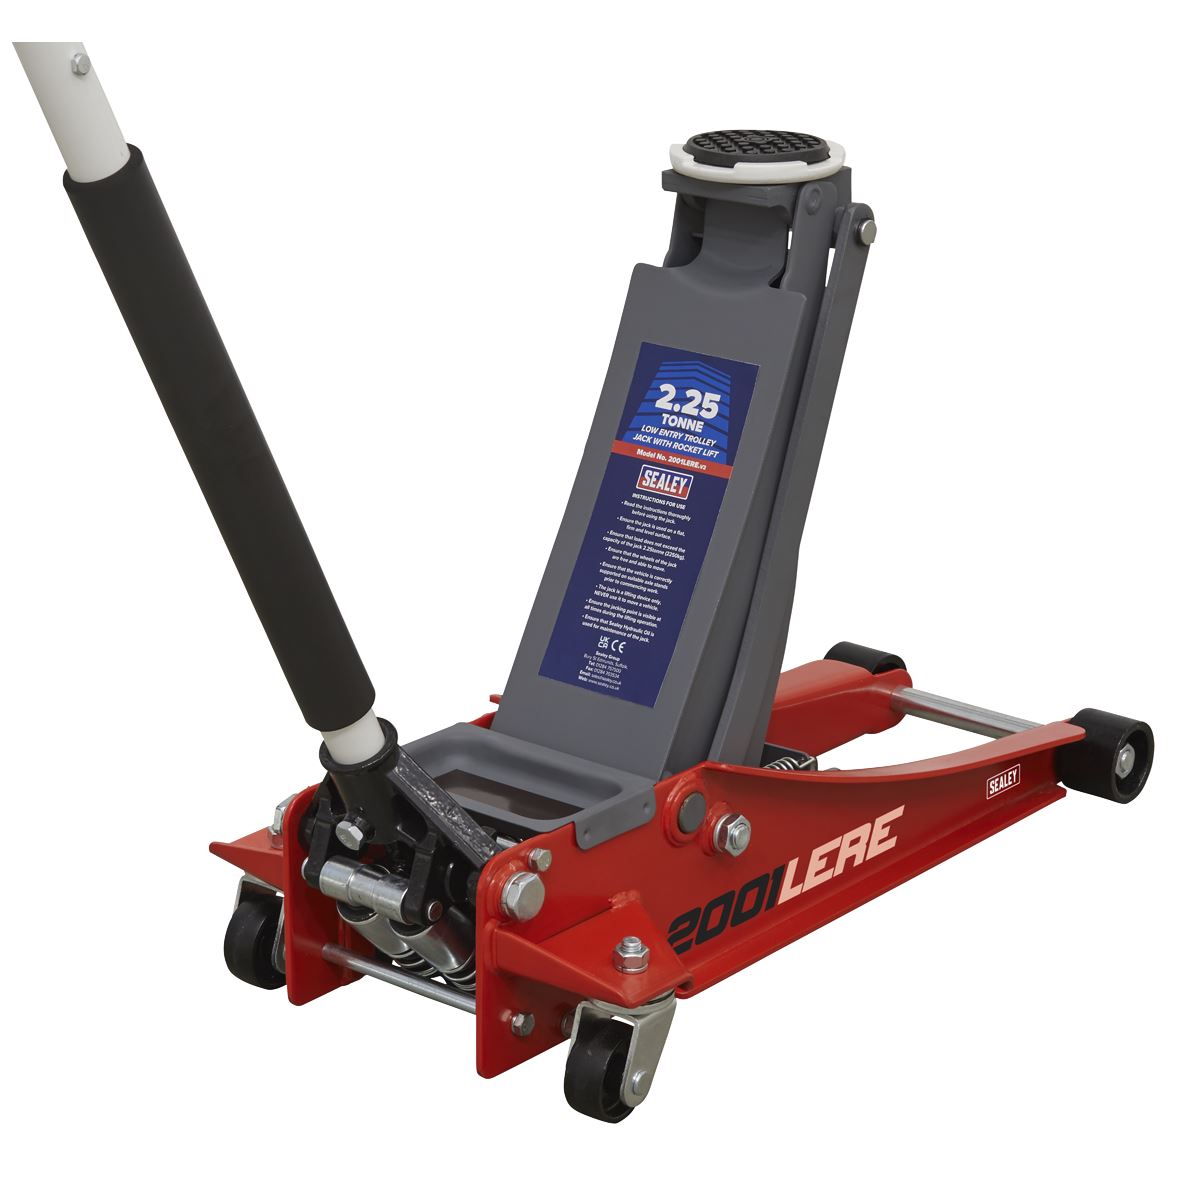 Sealey Low Profile Jack Stand Deal